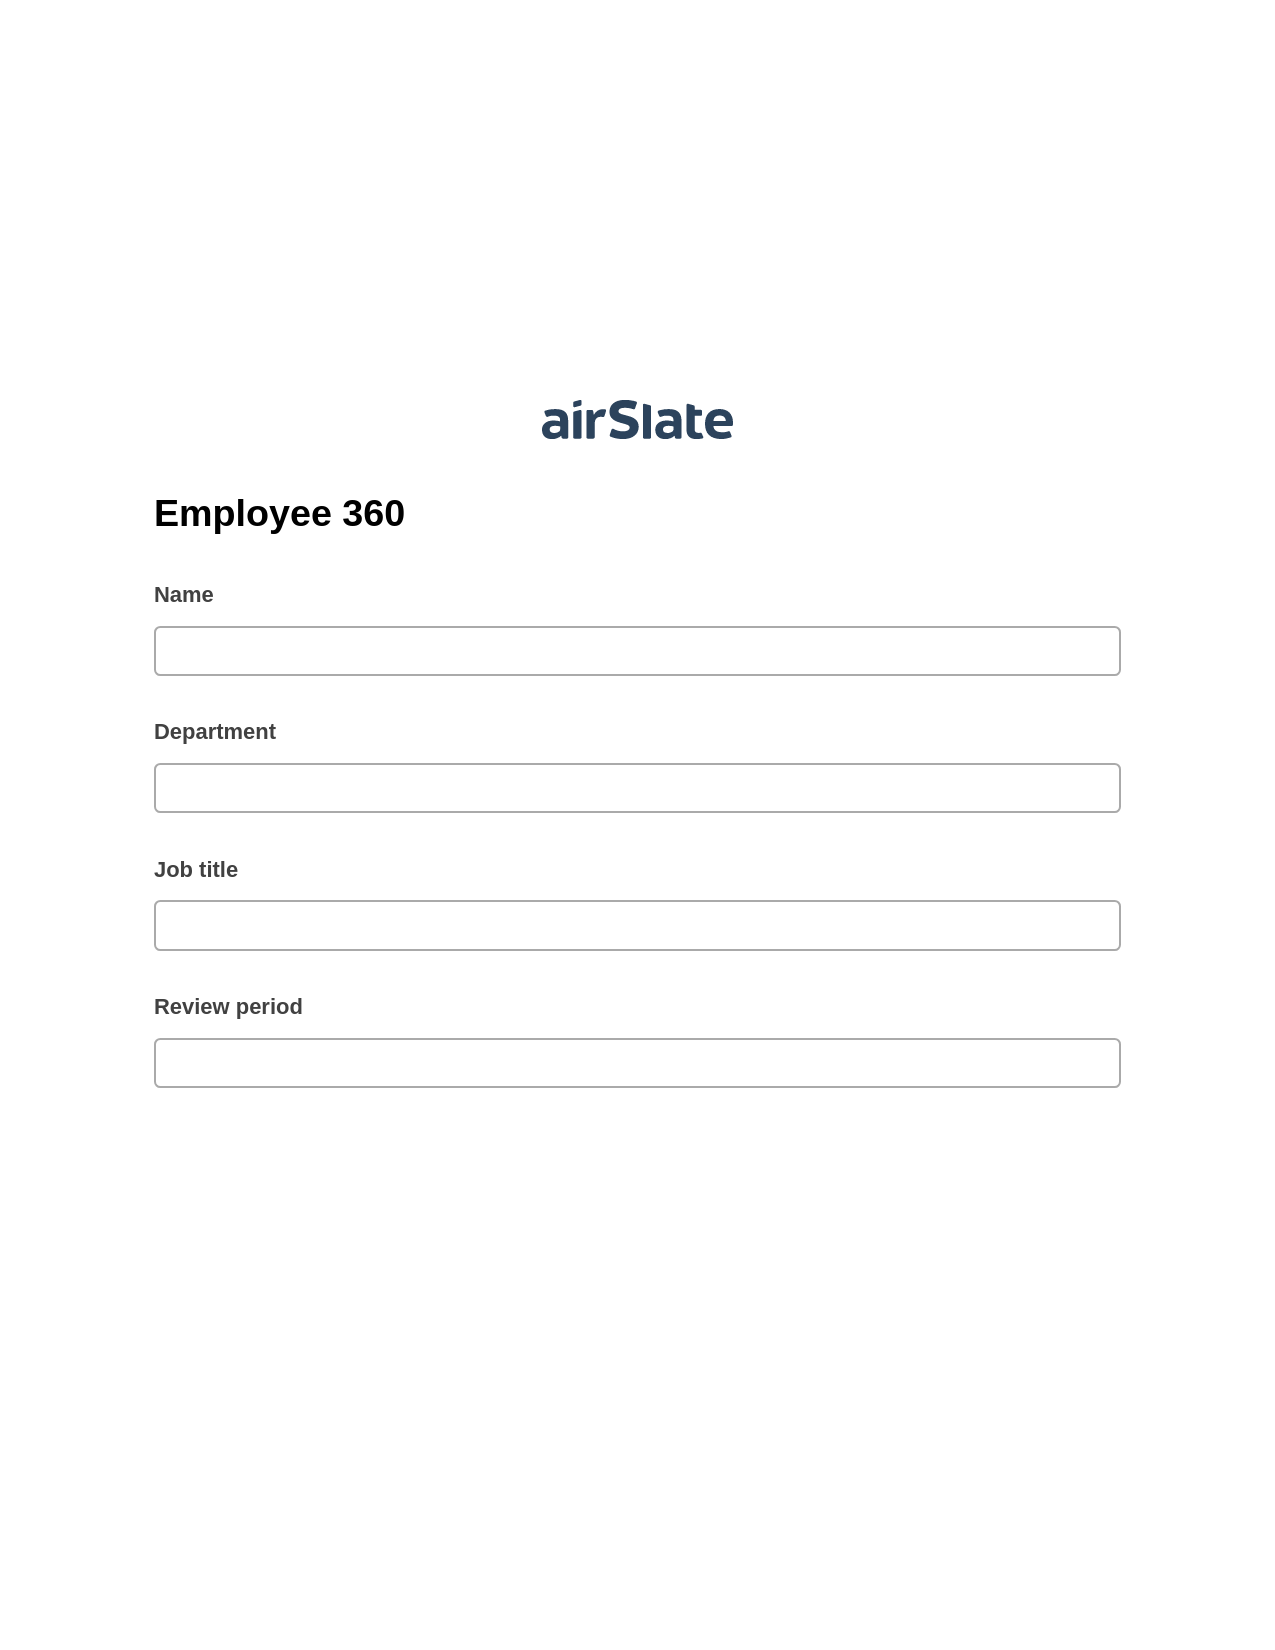 Employee 360 Pre-fill from MySQL Bot, Update MS Dynamics 365 Record Bot, Export to NetSuite Bot